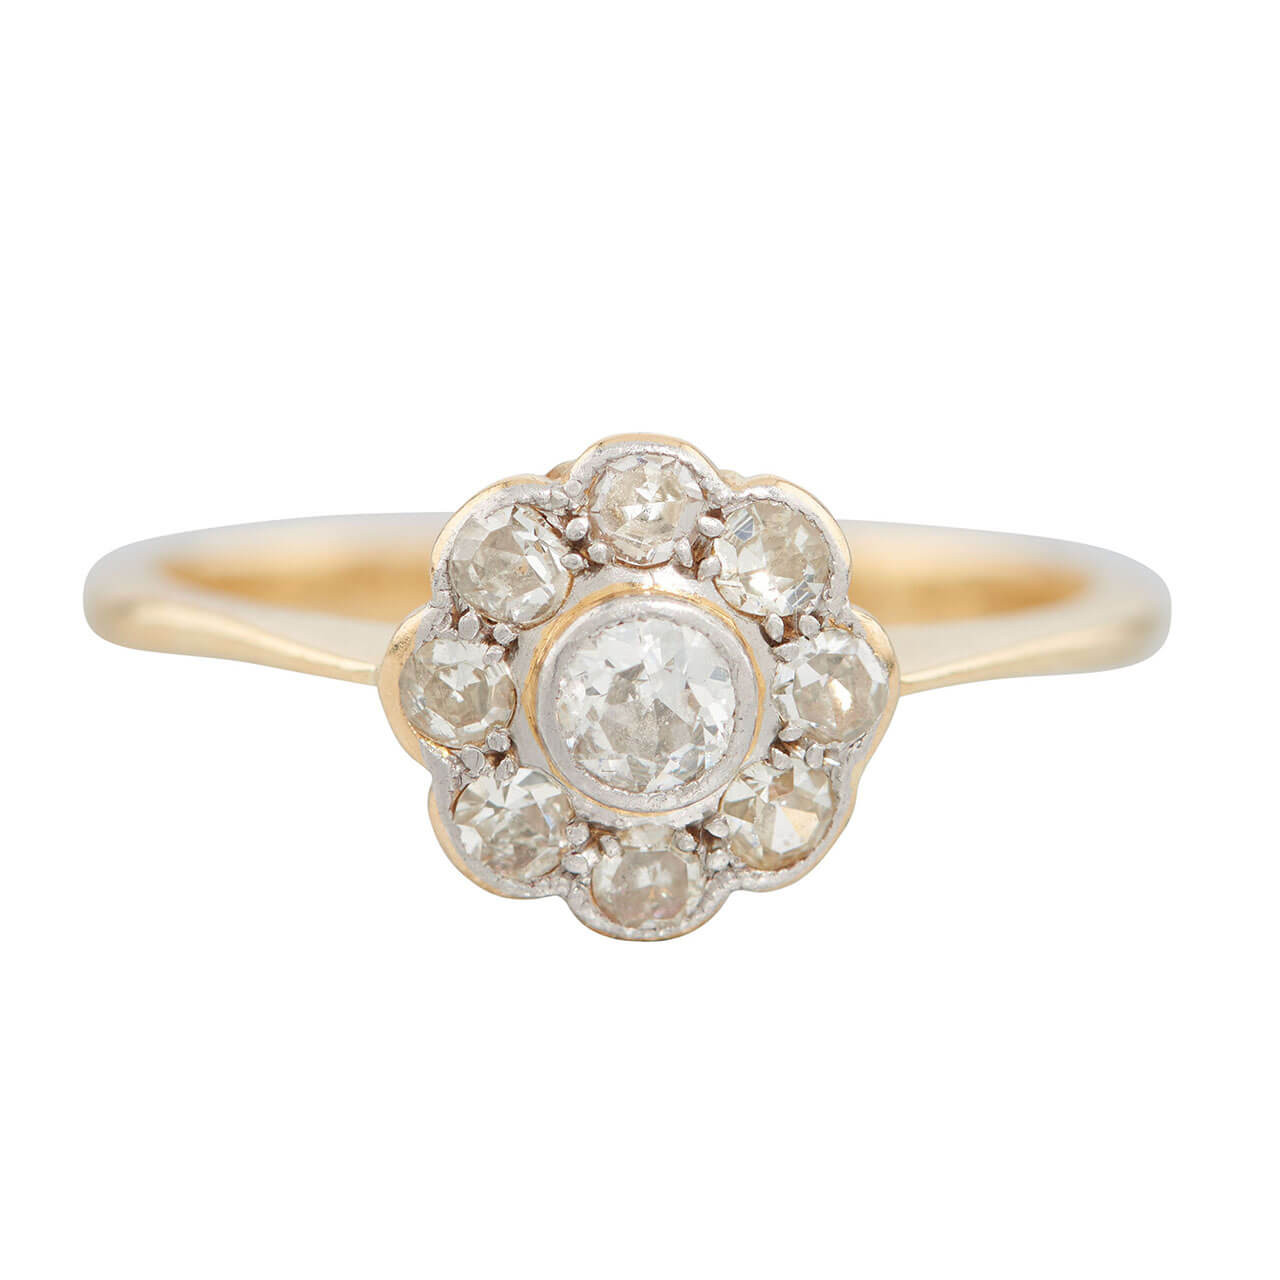 Engagement And Wedding 9 Diamond Gold Men's Ring, Size: 8mm at Rs 70000 in  Mumbai